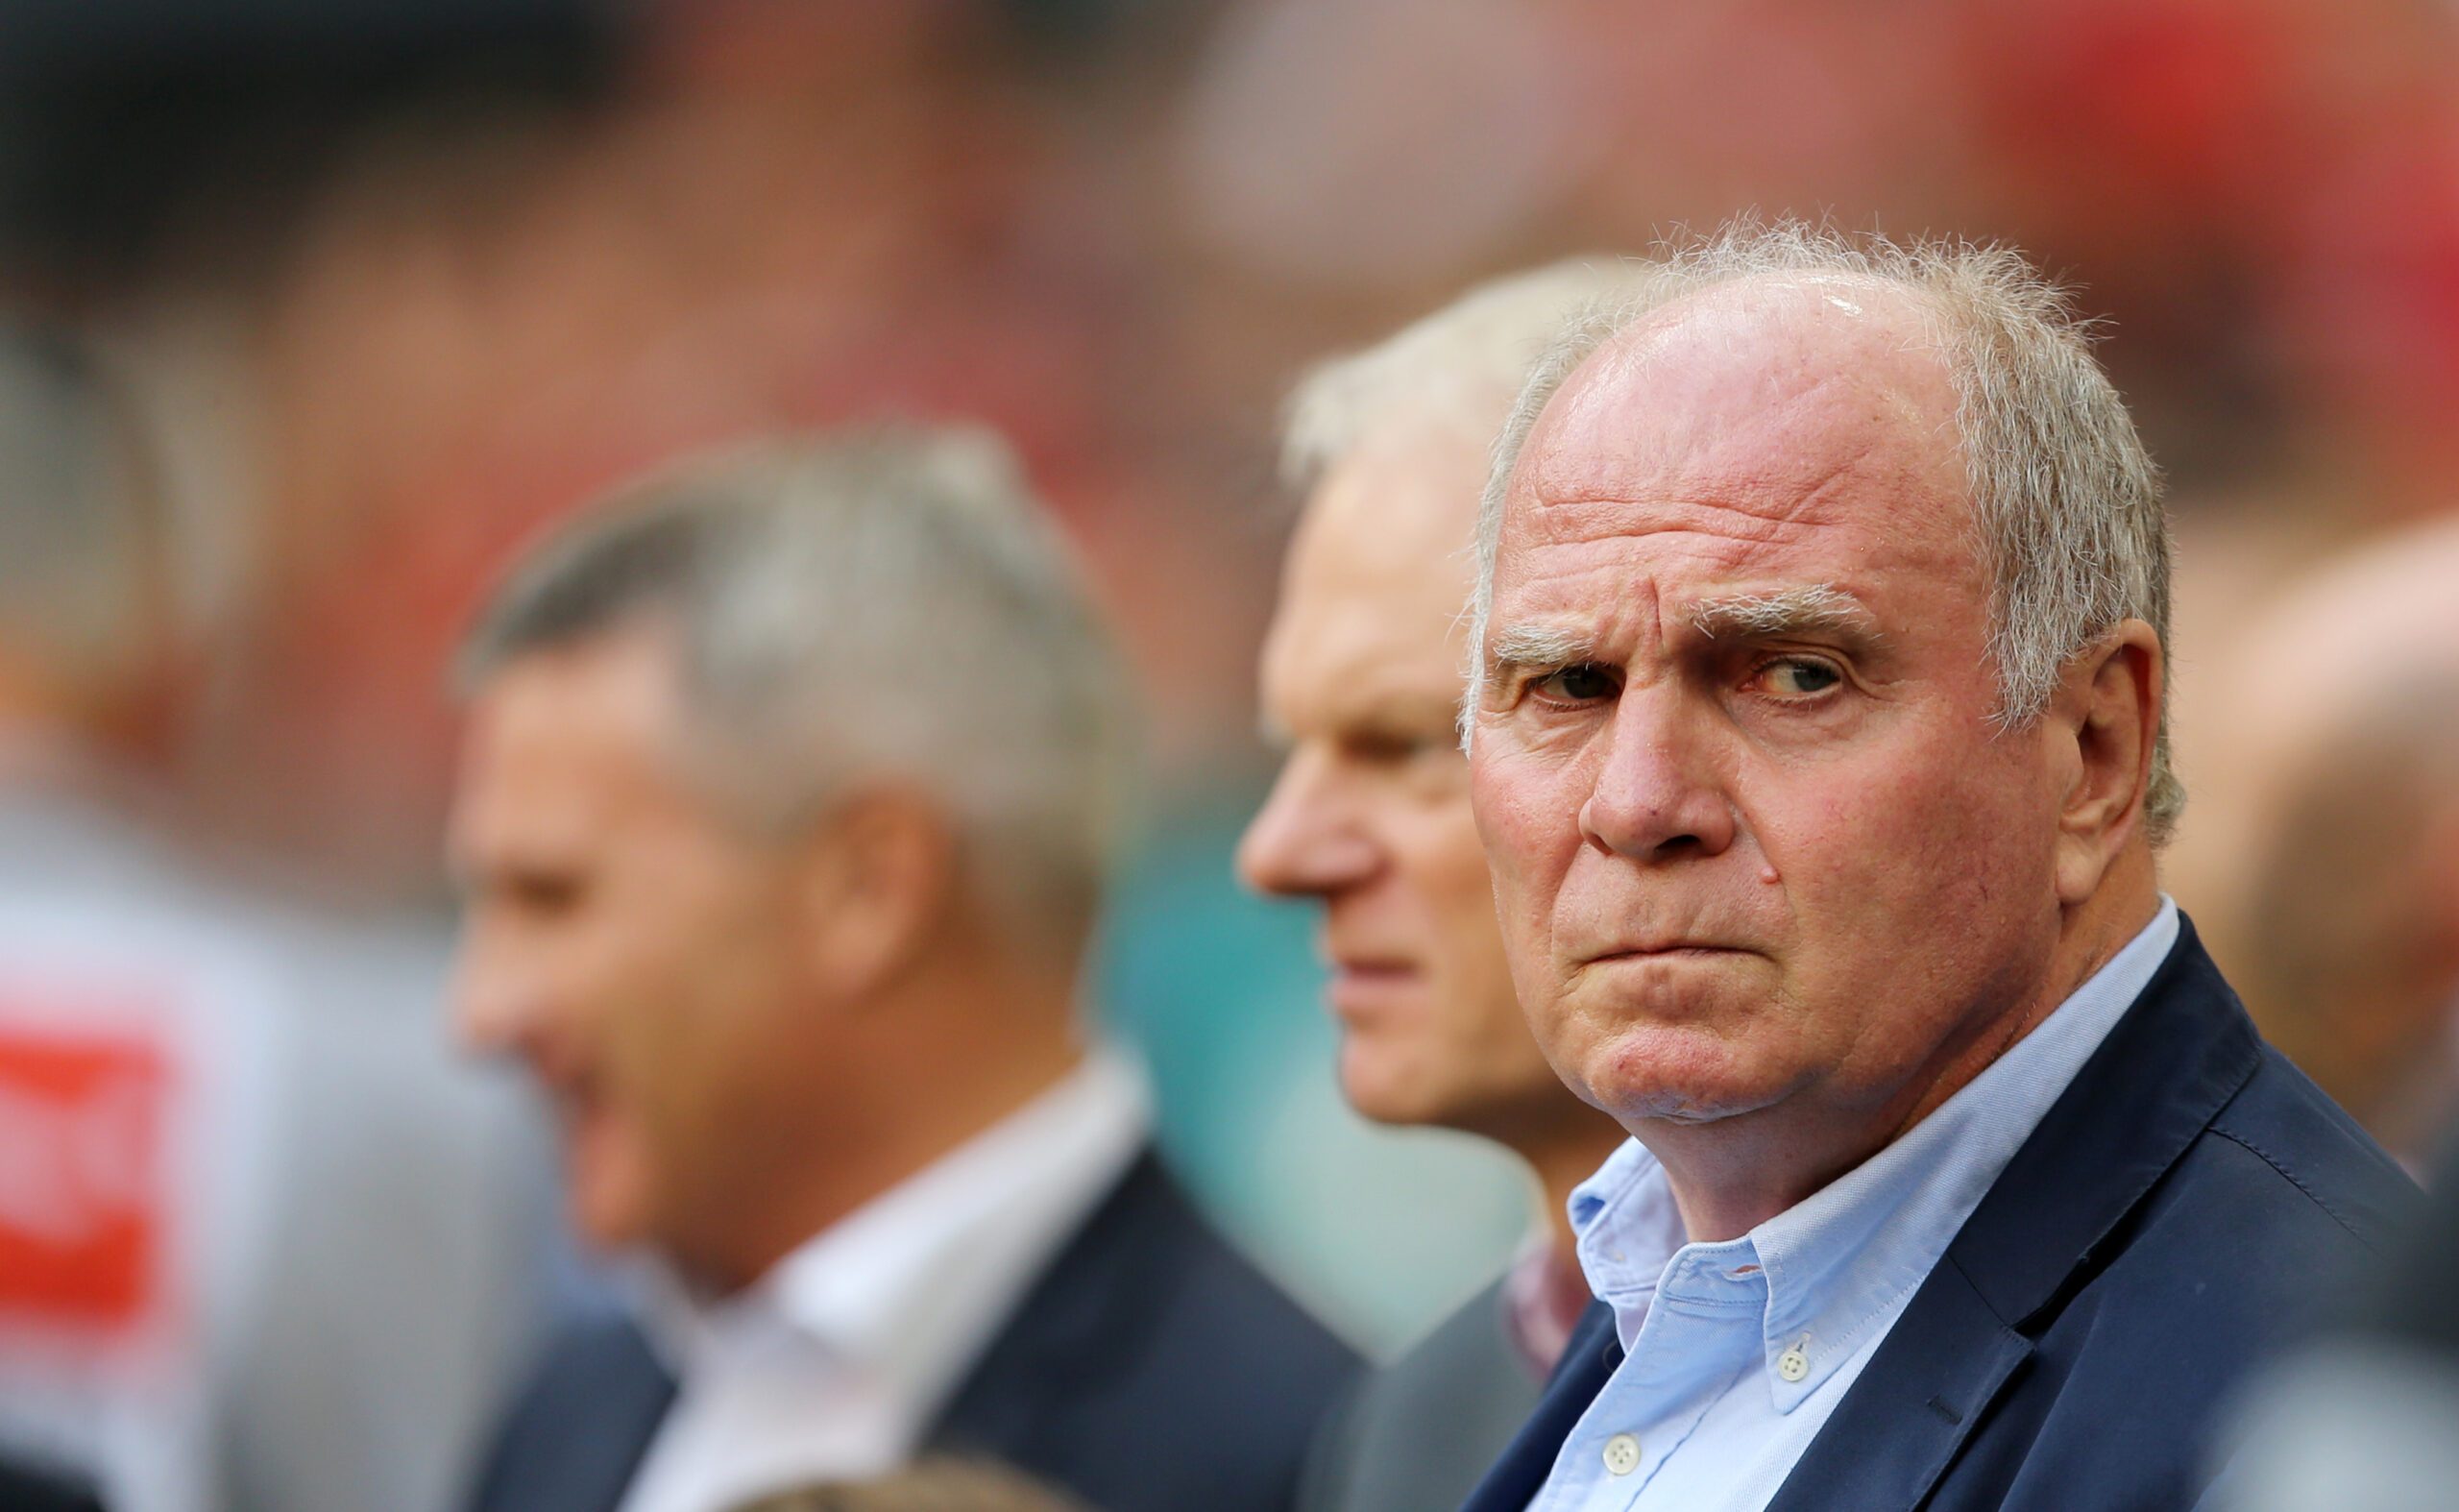 MUNICH,GERMANY,15.SEP.18 - SOCCER - 1. DFL, 1. Deutsche Bundesliga, FC Bayern Muenchen vs Bayer 04 Leverkusen. Image shows president Uli Hoeness (Bayern). Photo: GEPA pictures/ Thomas Bachun - DFL regulations prohibit any use of photographs as image sequences and/or quasi-video.